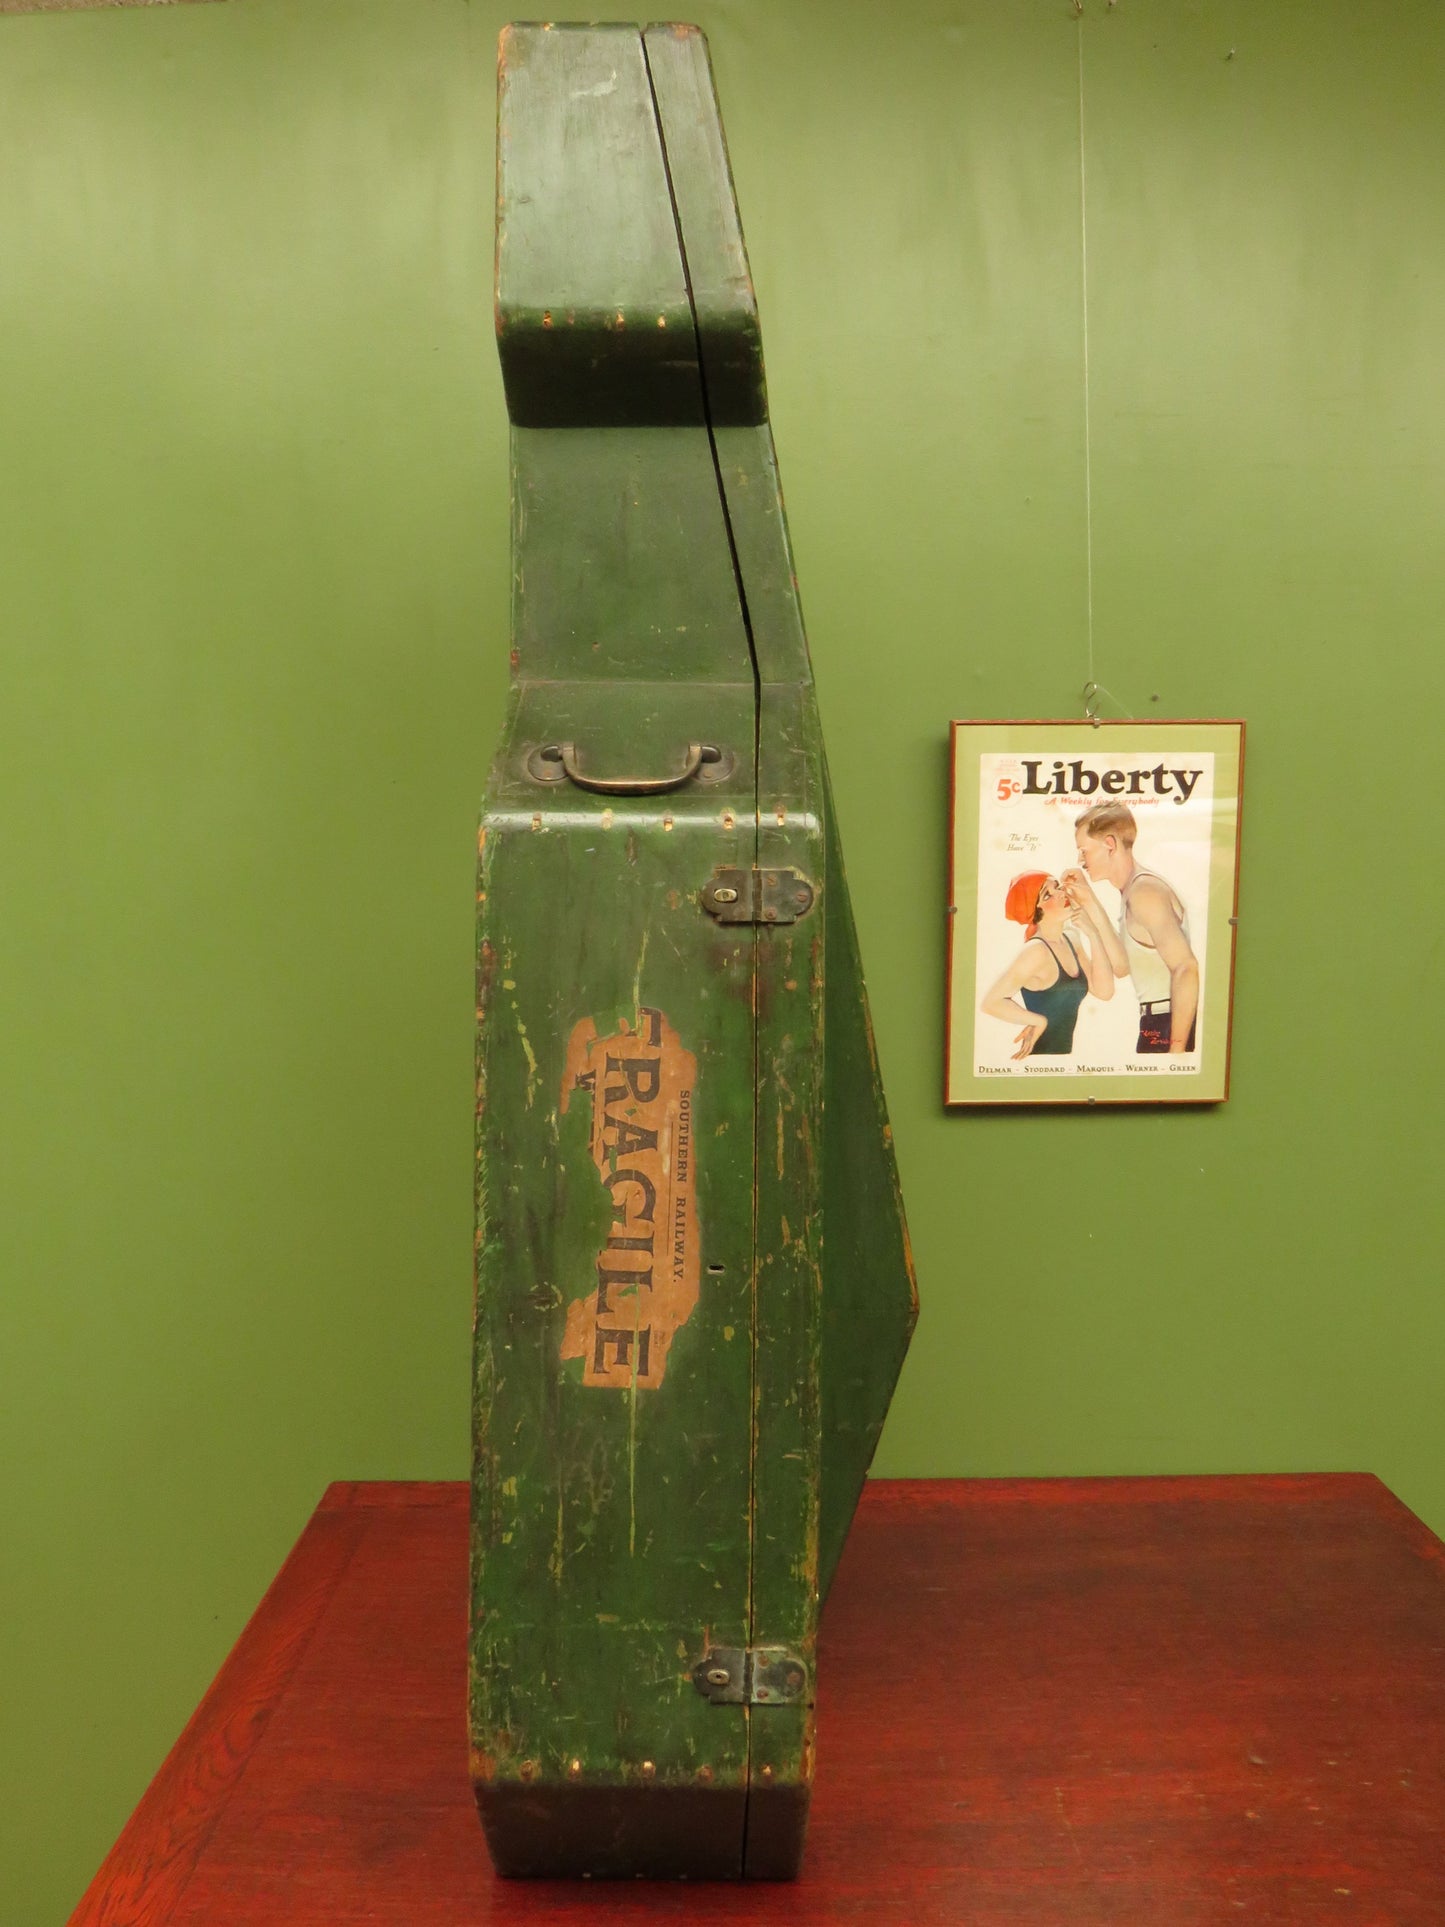 Antique Green Cello Case for Restoration or Display